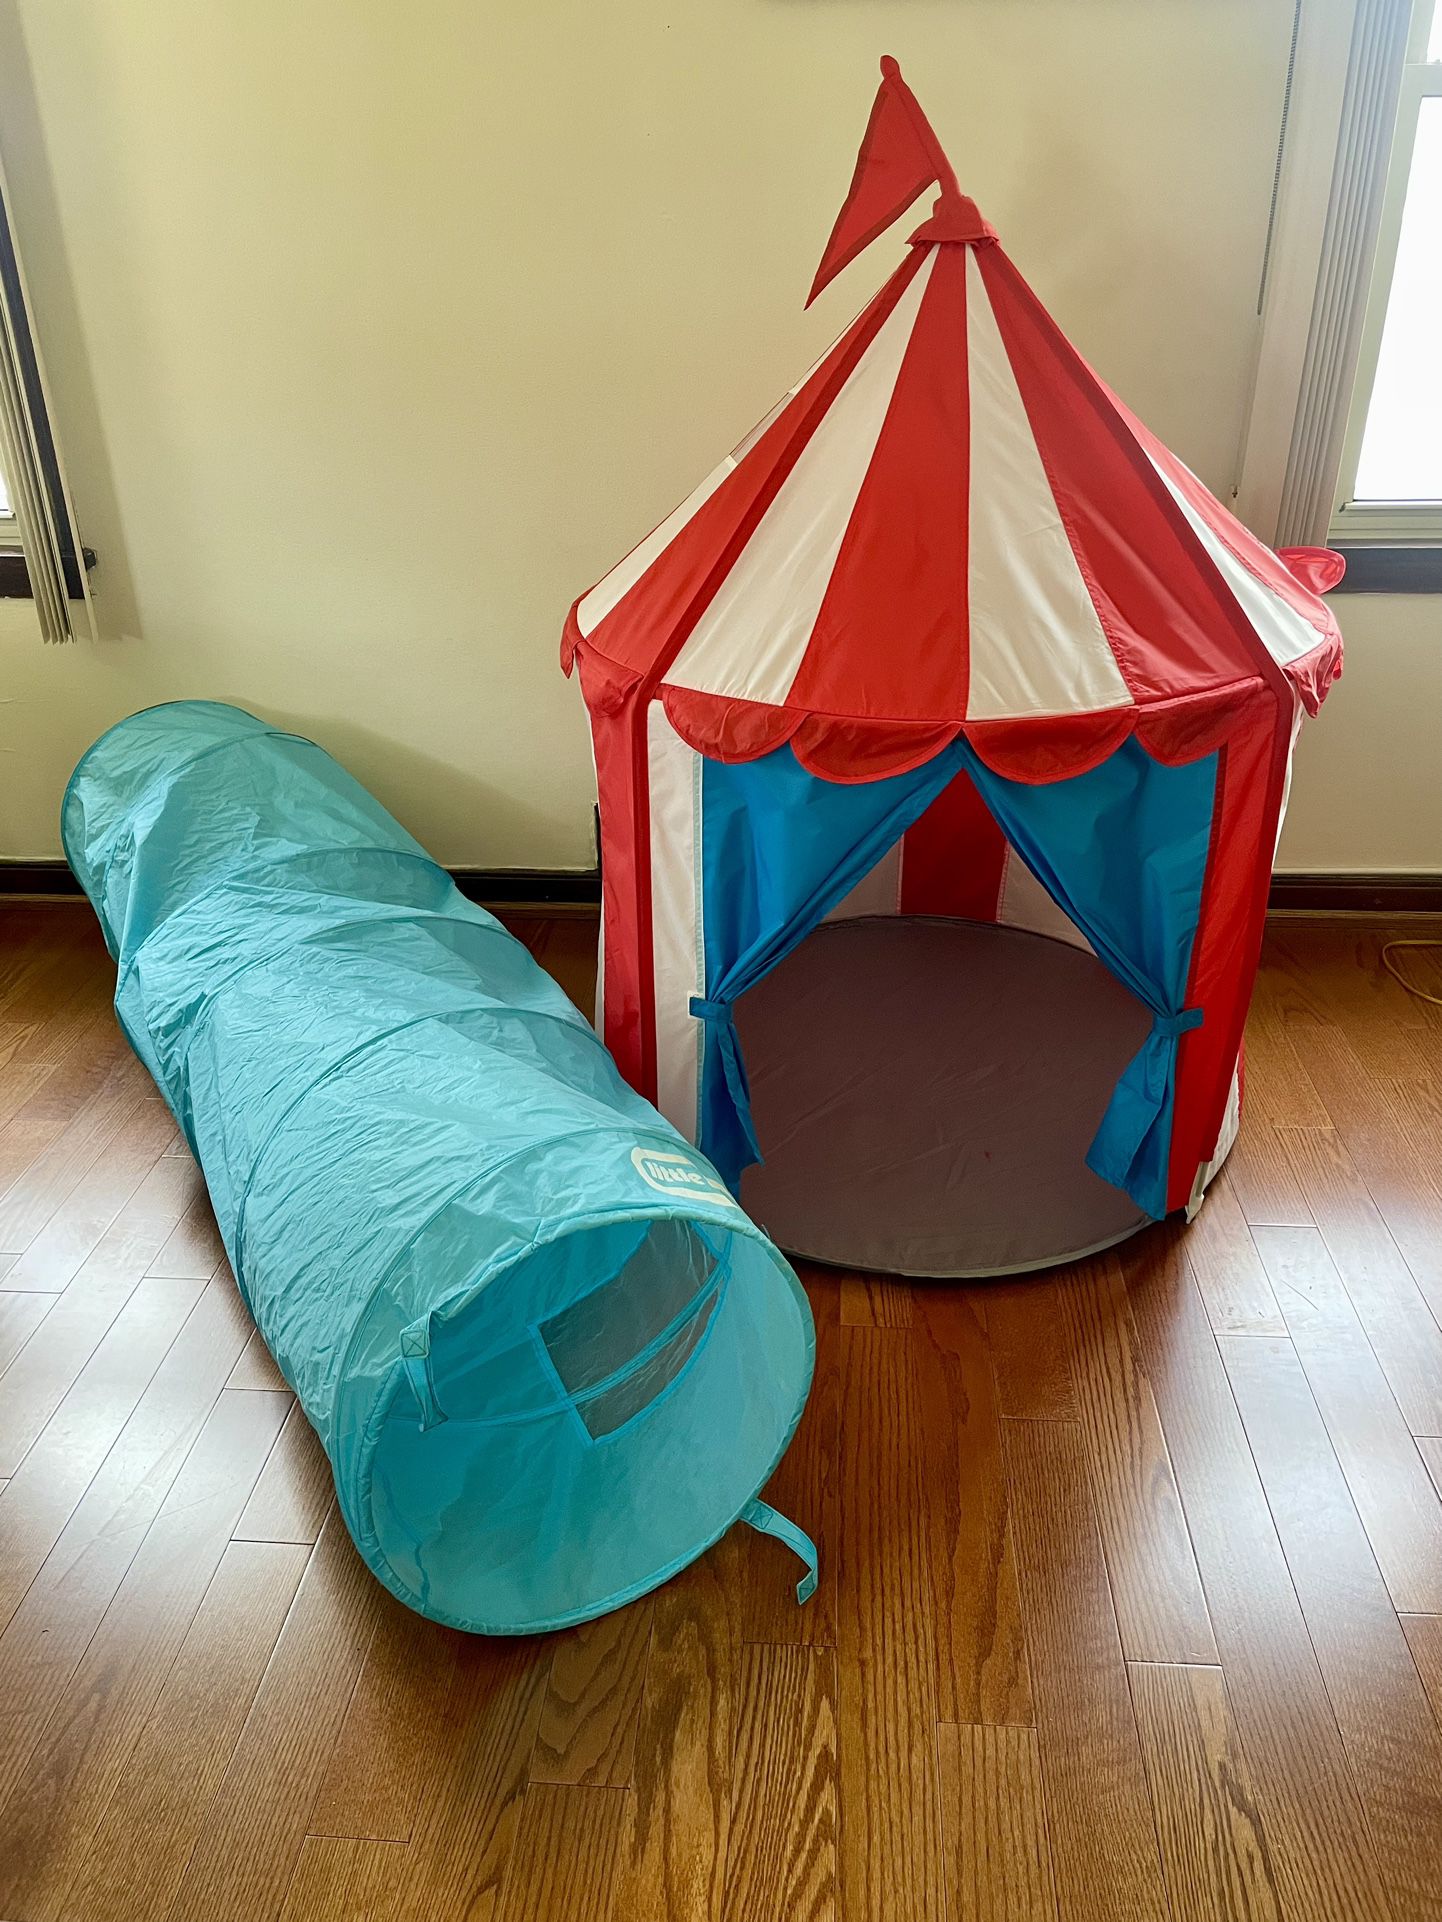 IKEA Kids Circus Play Tent and Little Tikes 5ft Play Tunnel